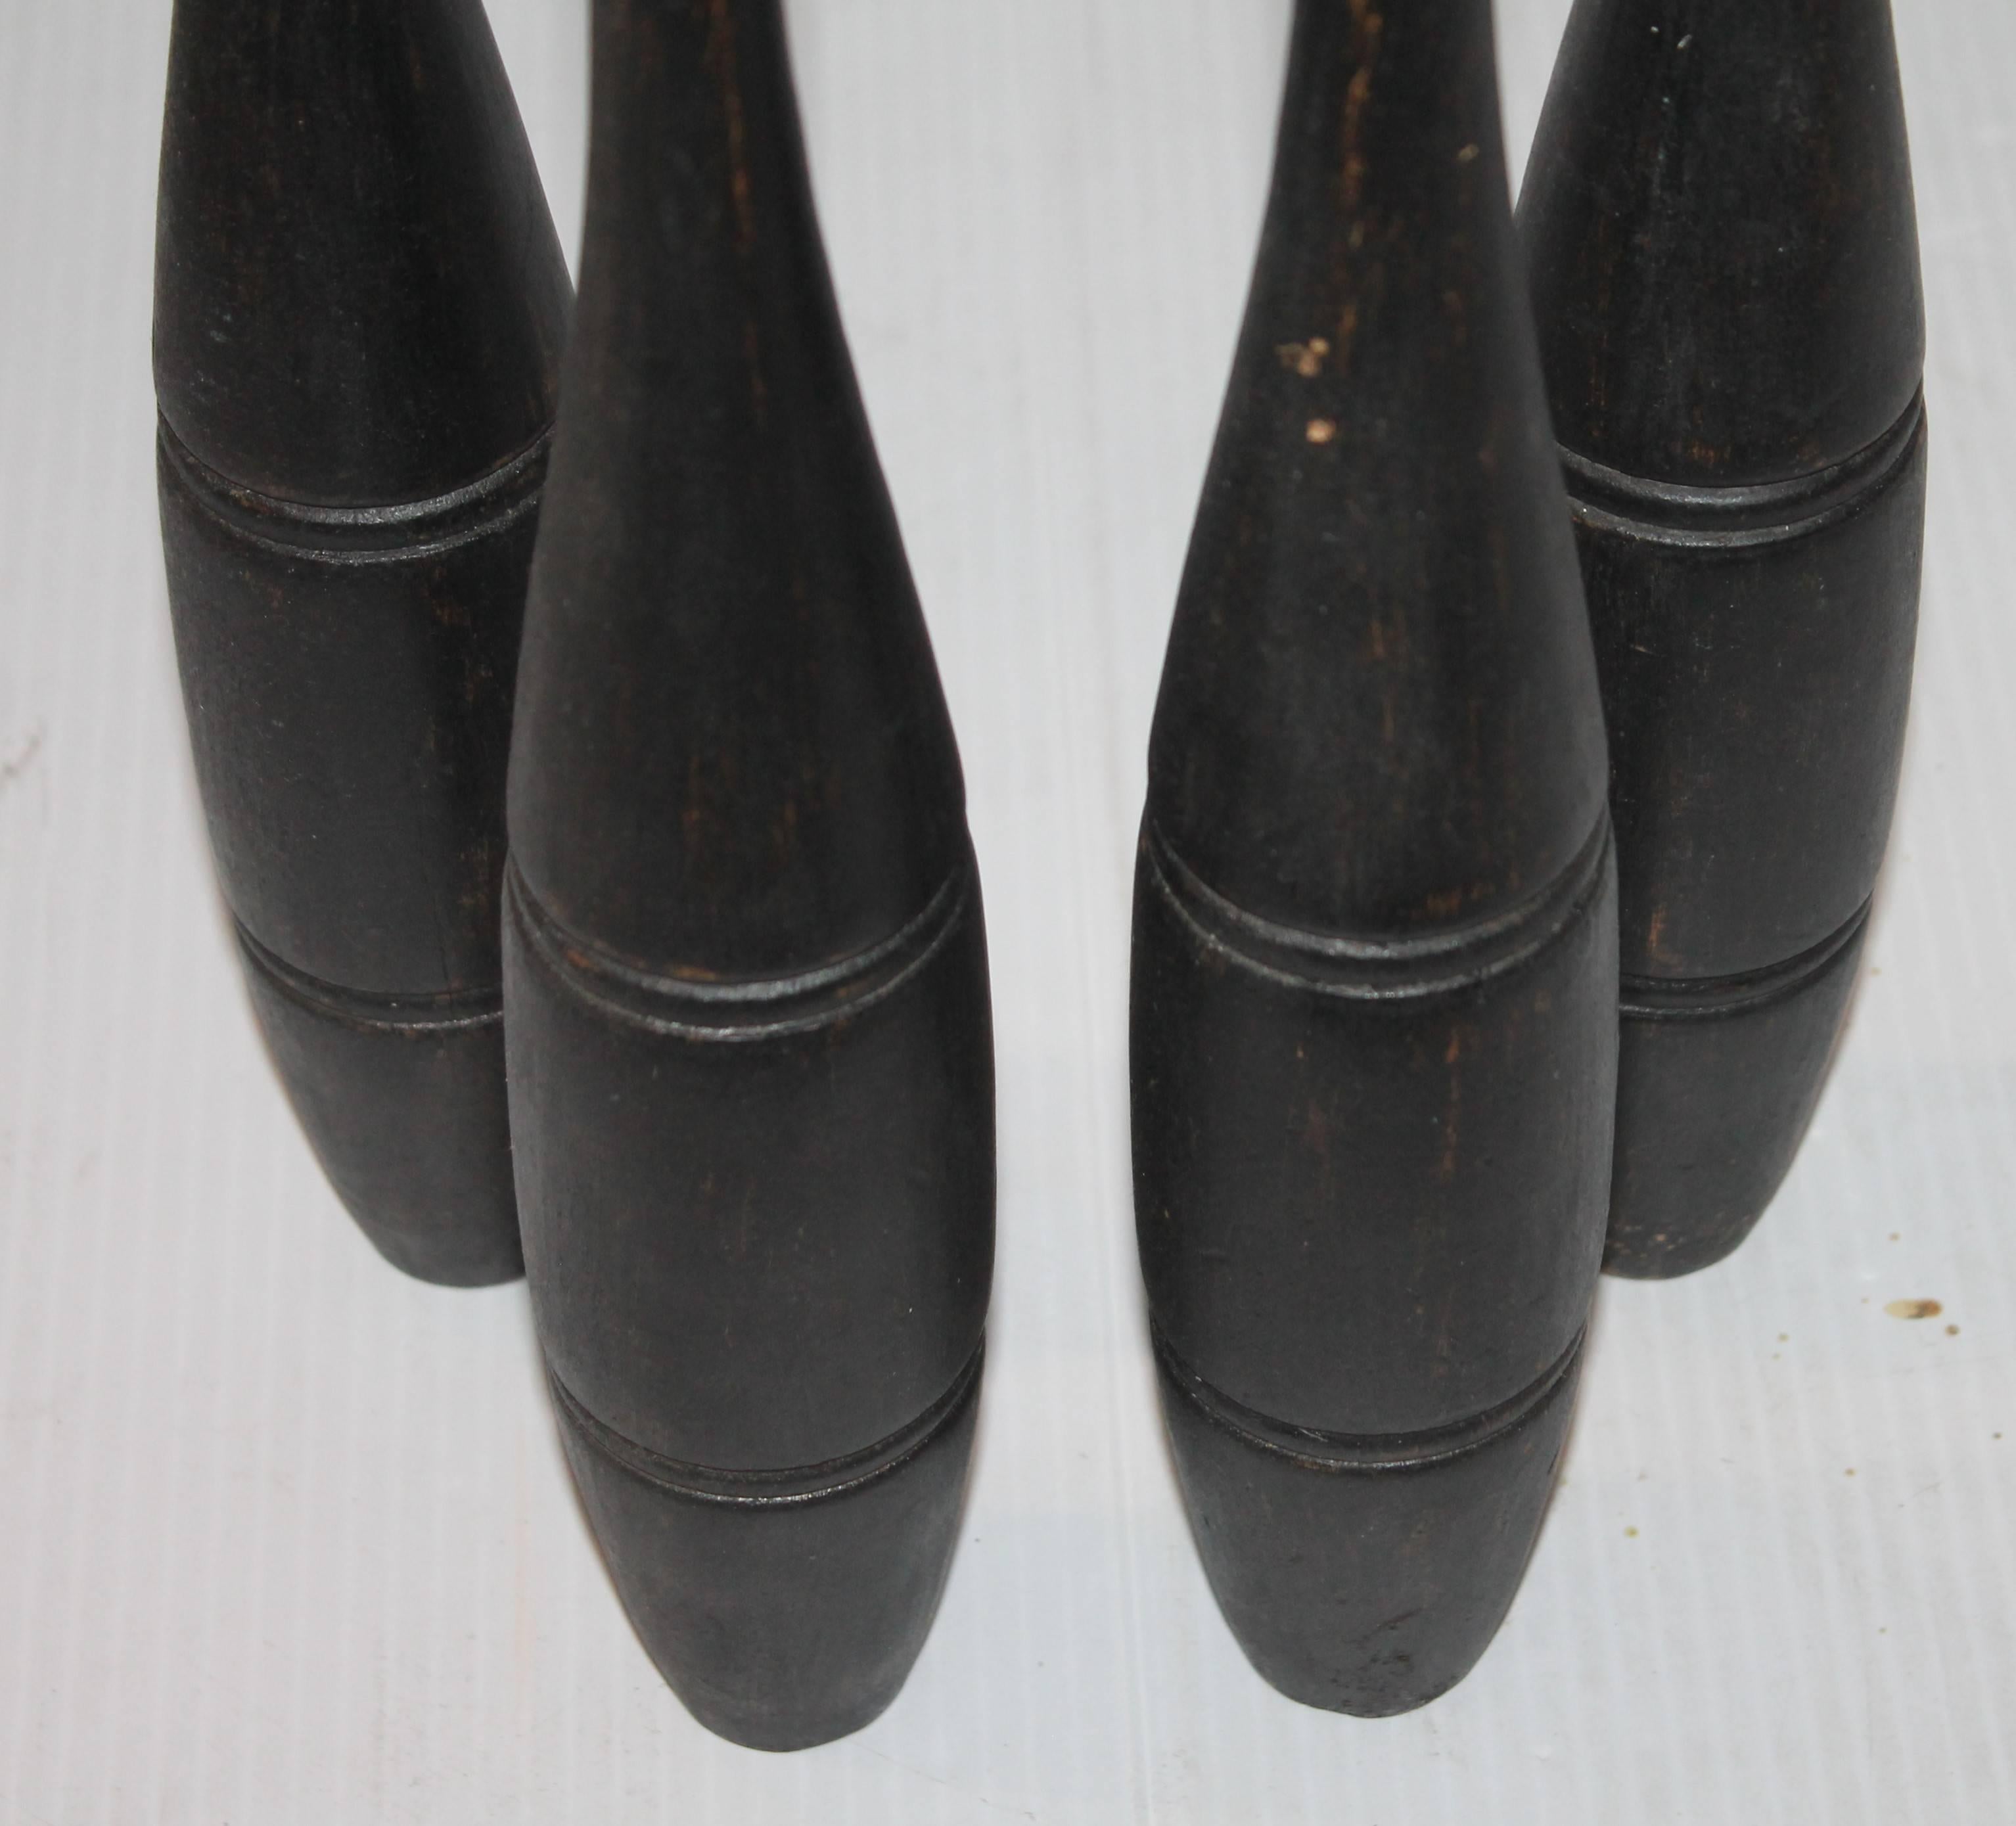 Folk Art Collection of Six 19th Century Black Painted Juggling Pins